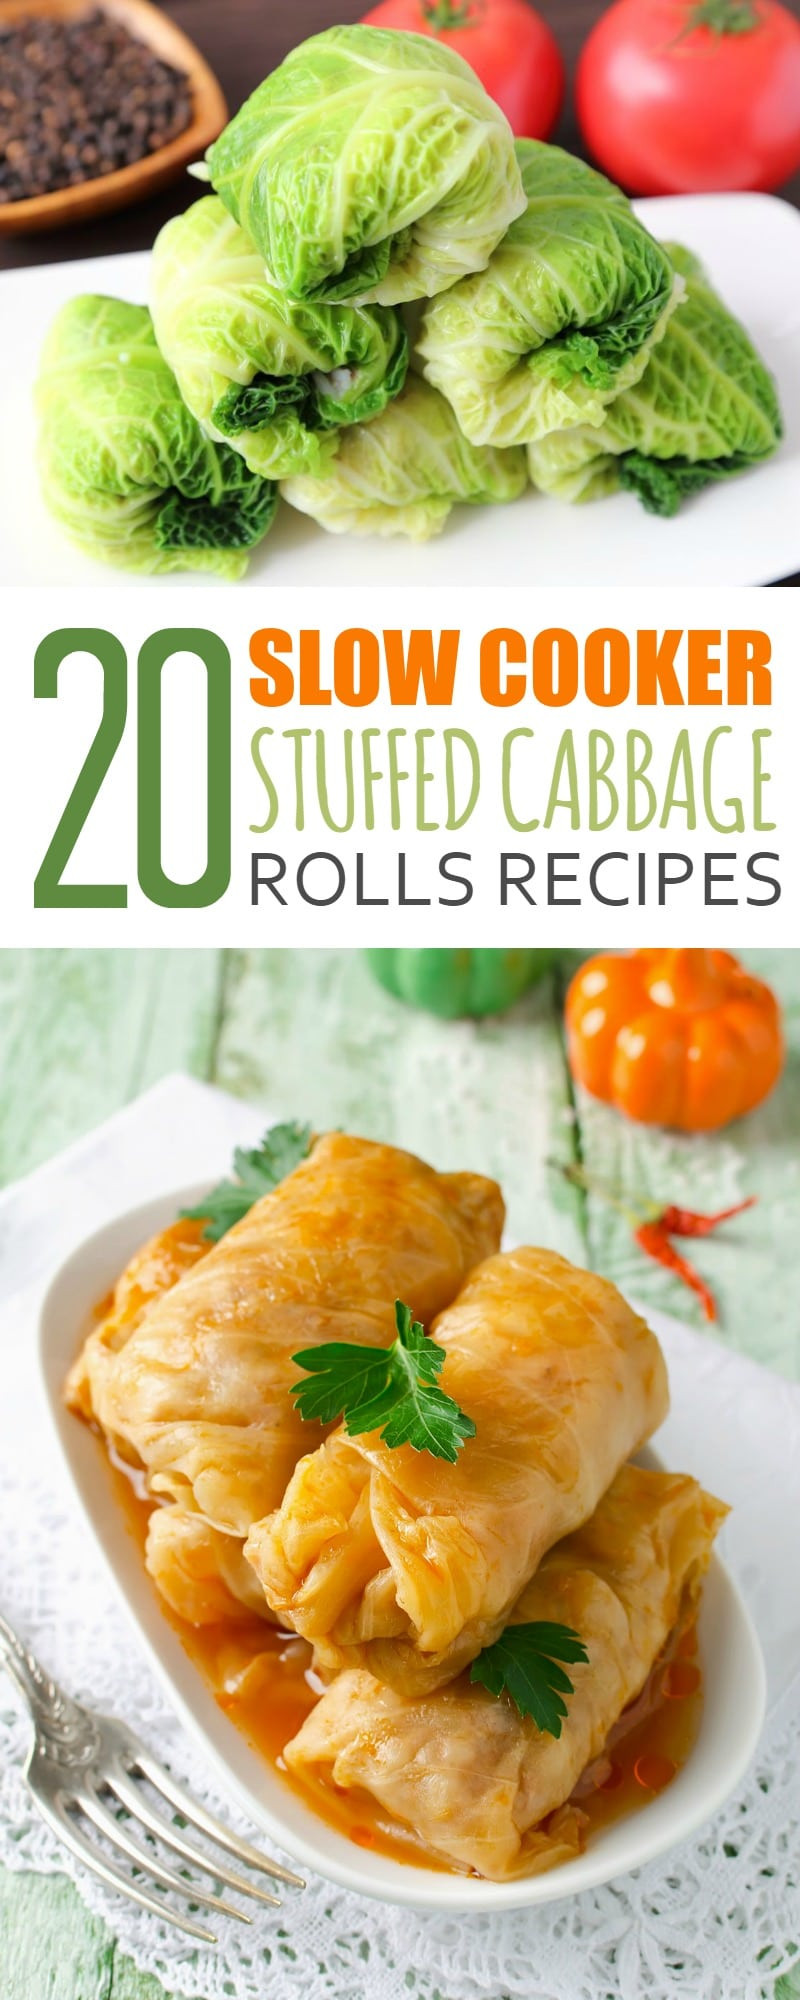 Slow Cooker Cabbage Recipes
 Slow Cooker Cabbage Rolls 20 Delicious Recipes 730